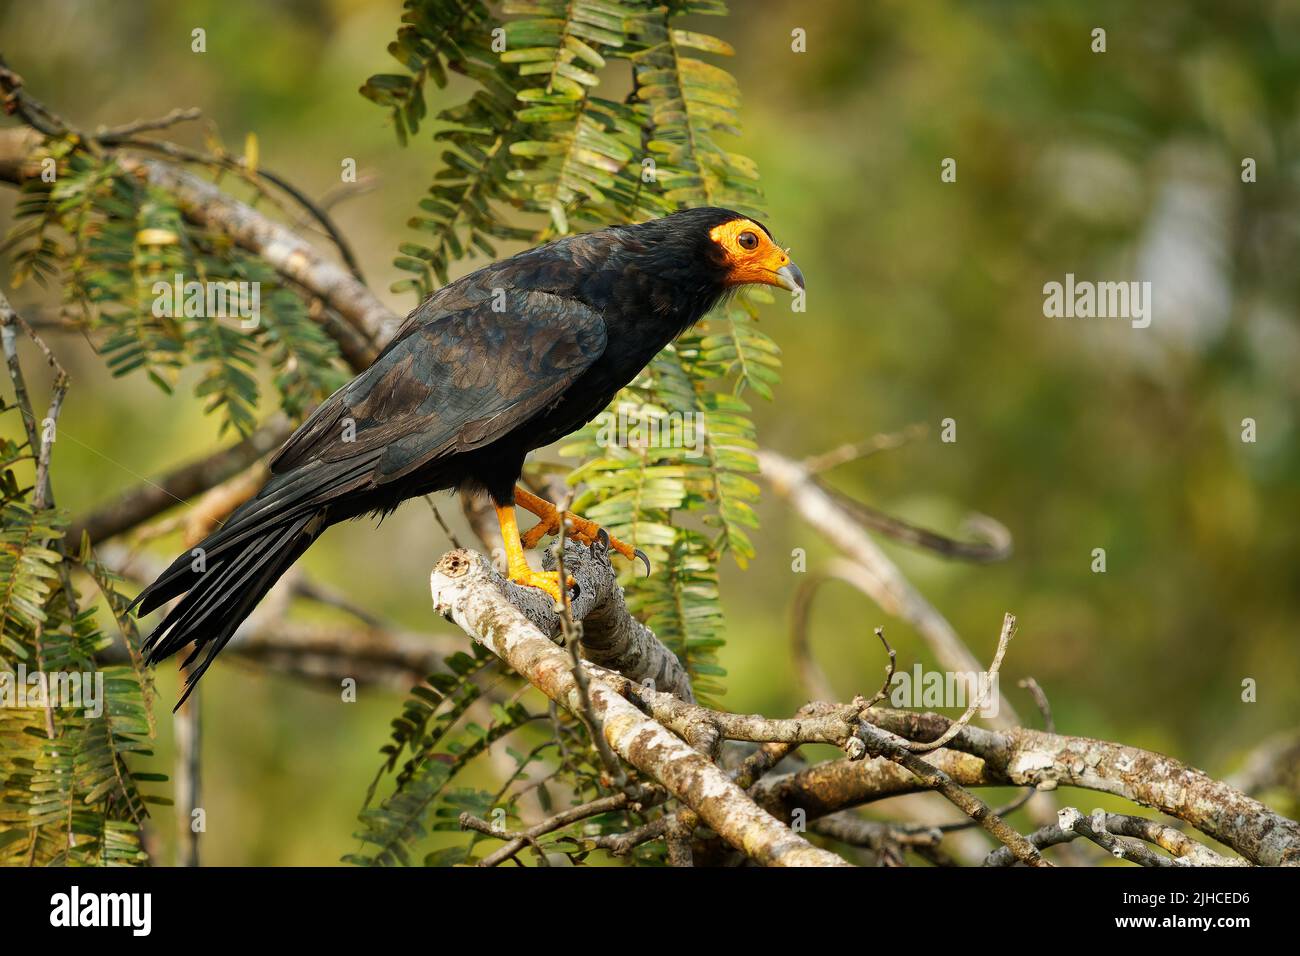 Black Caracara - Daptrius ater bird of prey in Falconidae found in Amazonian and French Guiana lowlands along rivers. Dark black bird with the yellow Stock Photo